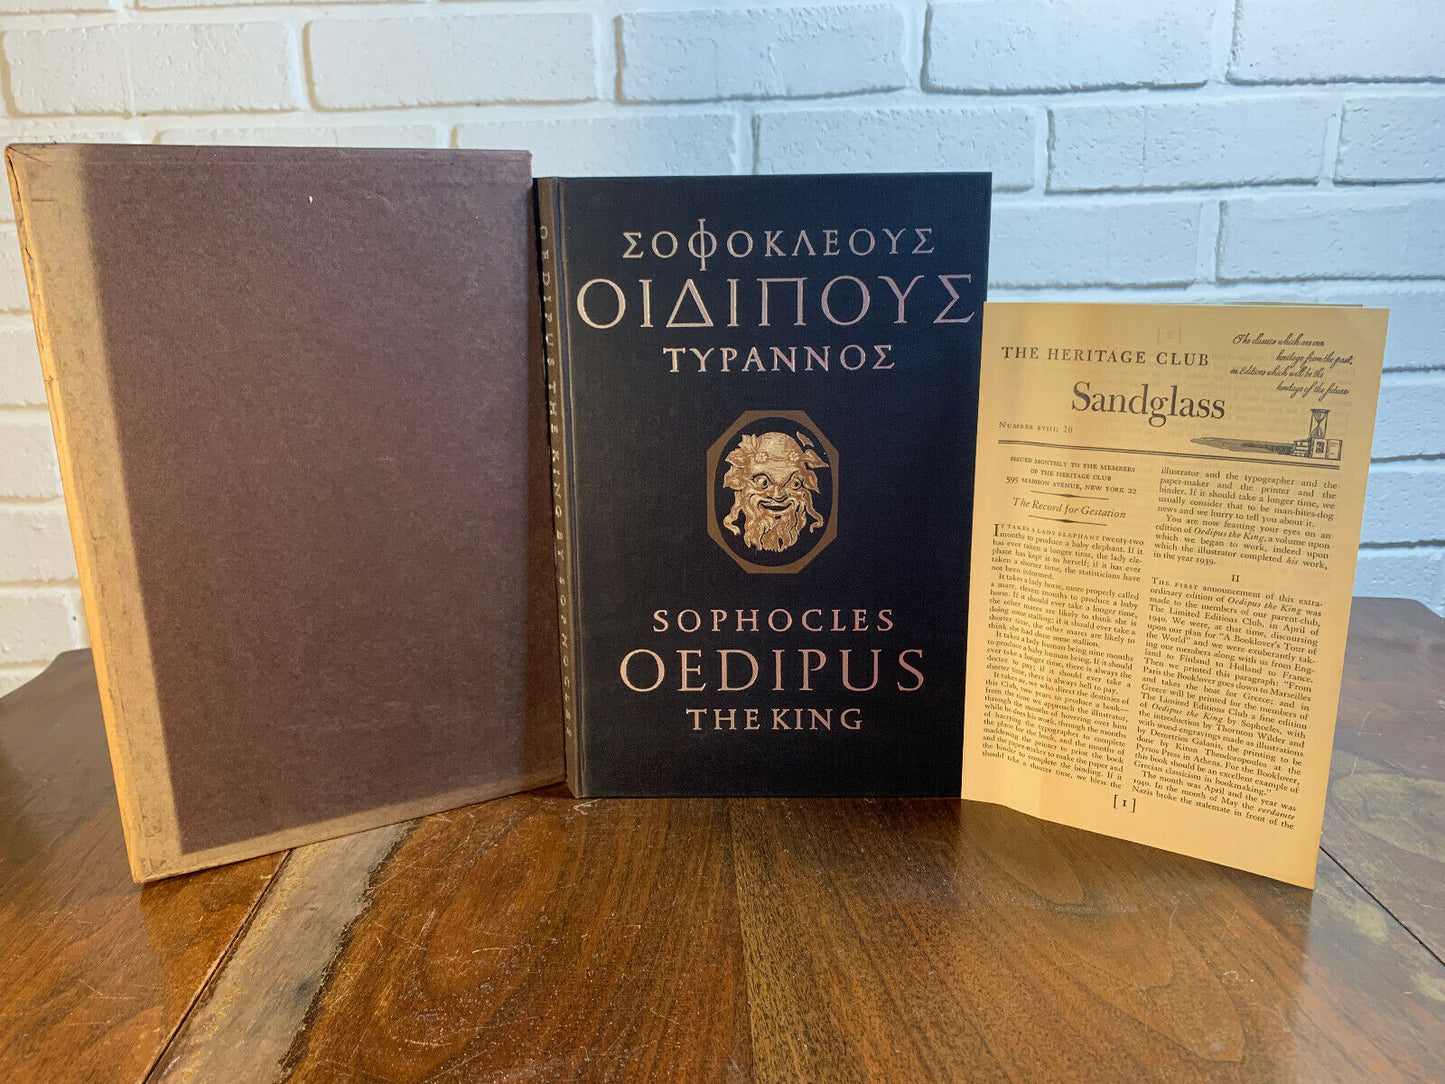 Oedipus the King by Sophocles w/ Sandglass